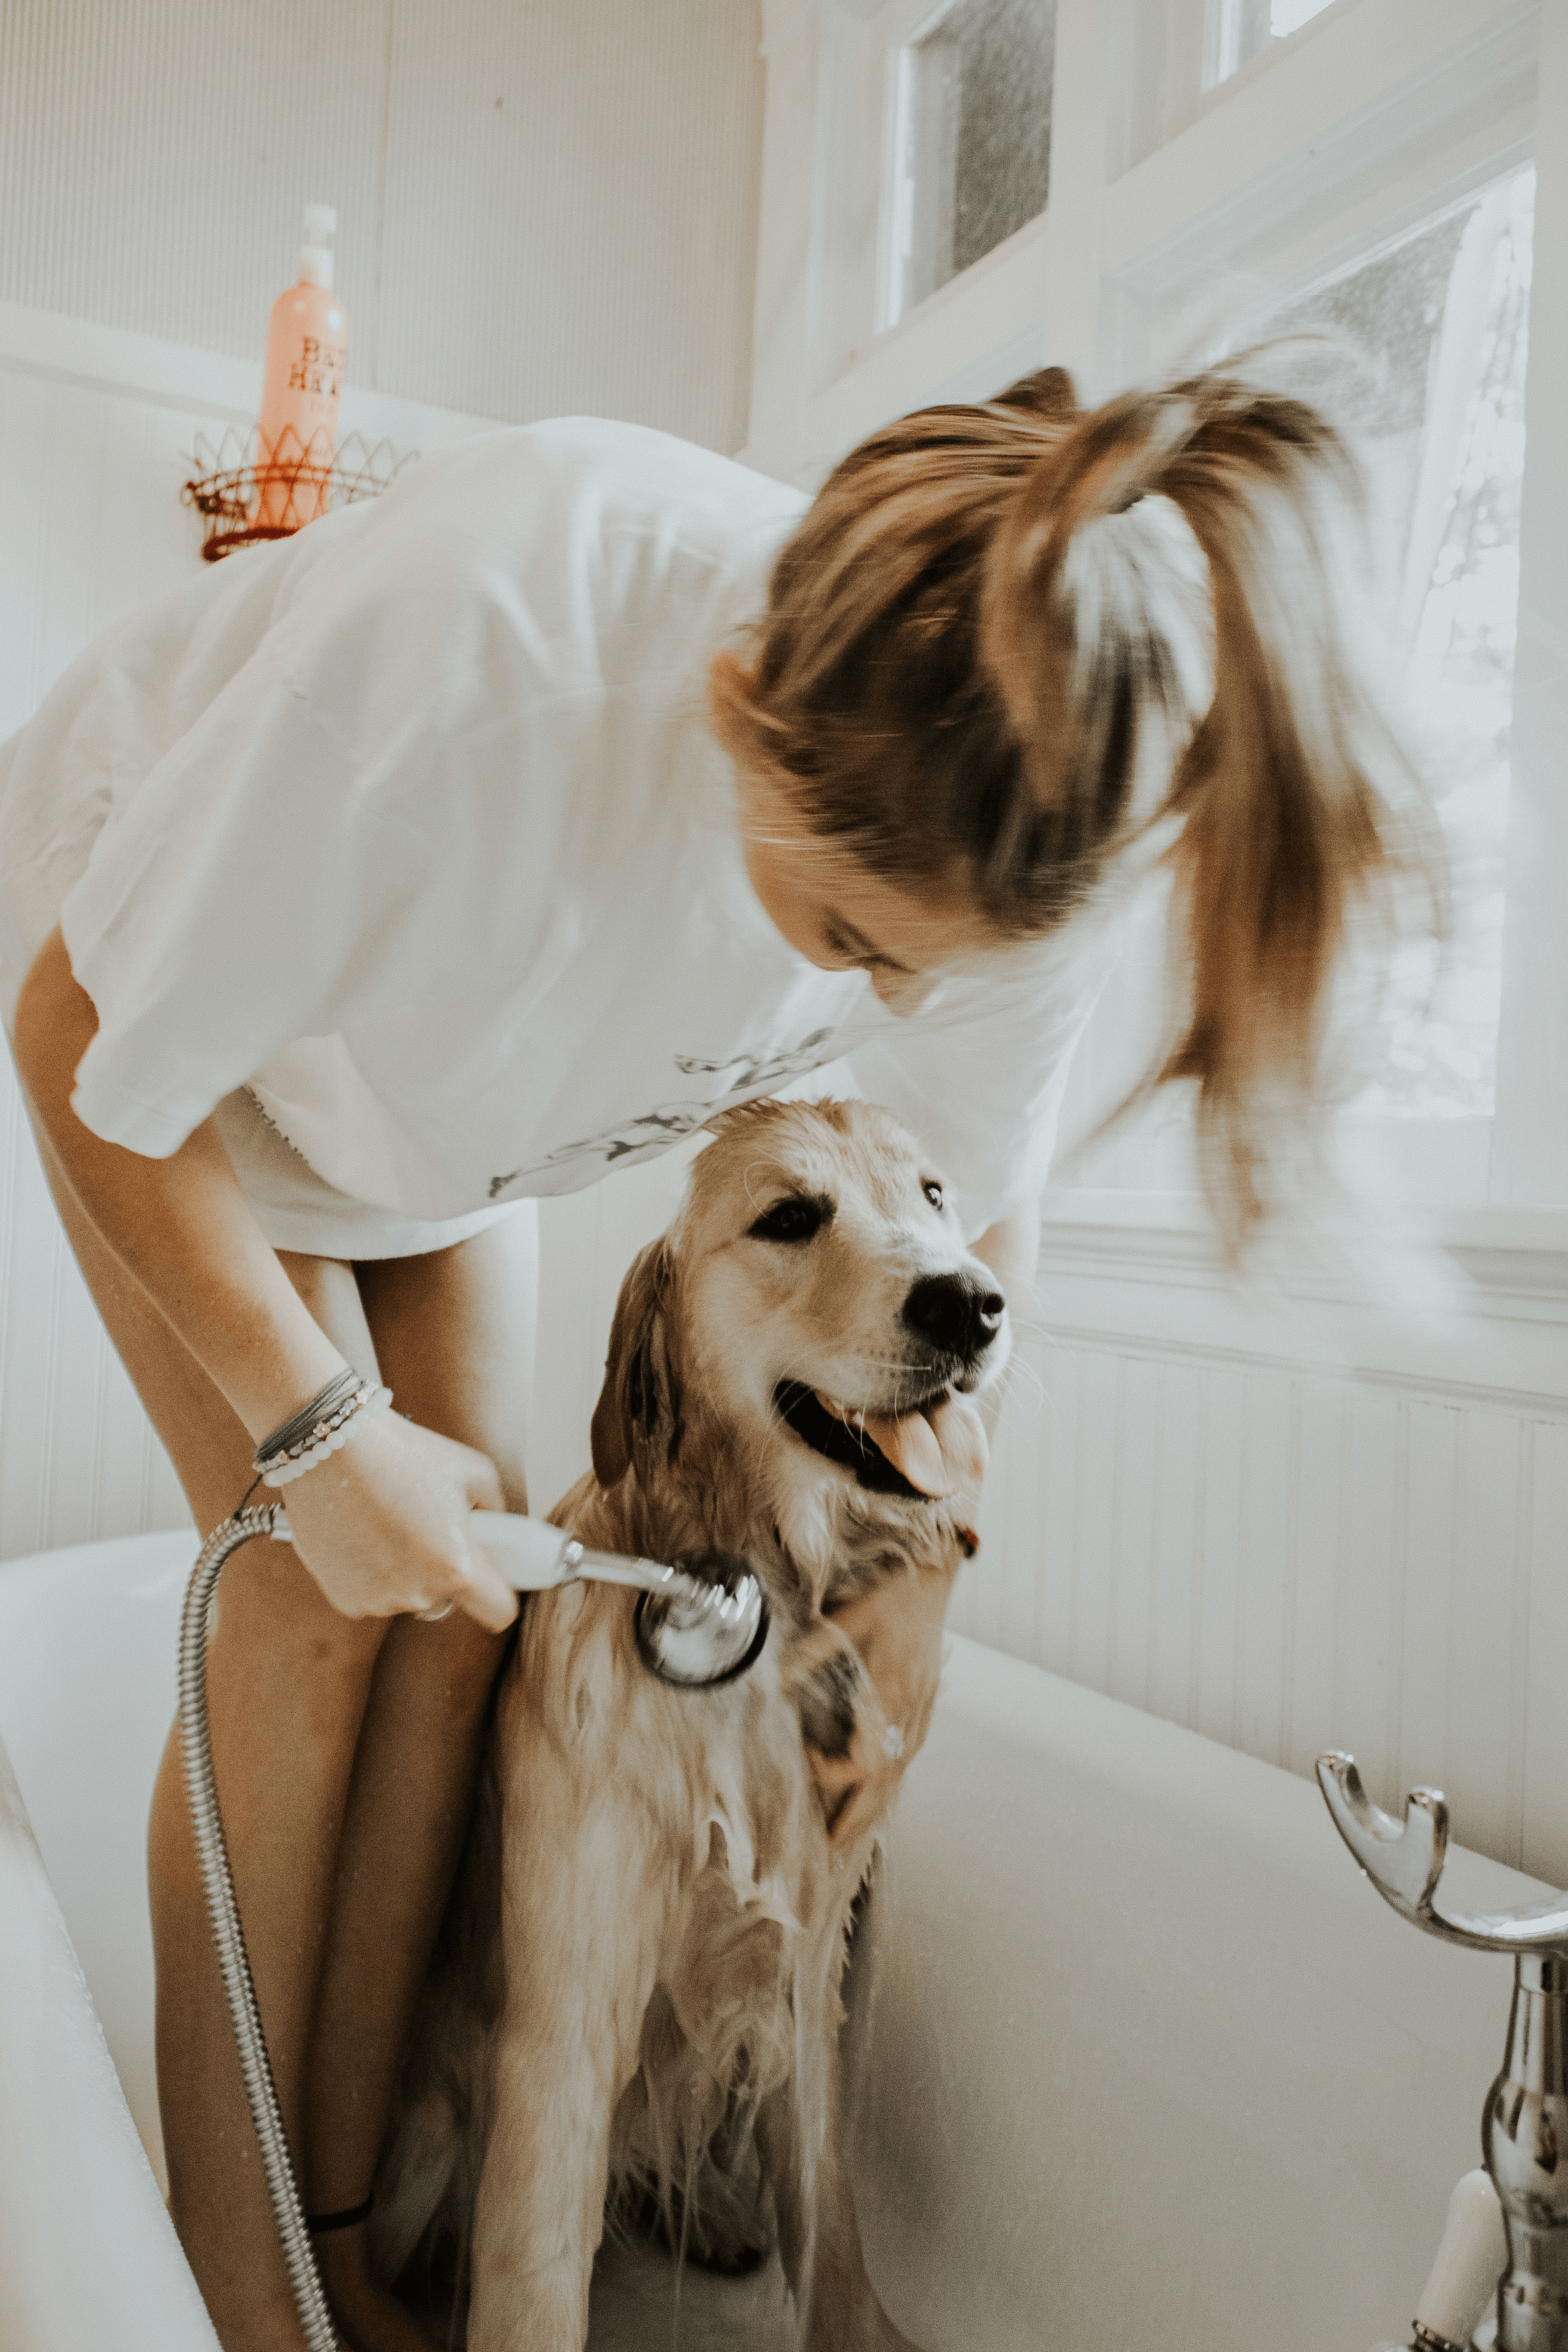 Showering your dog puppy